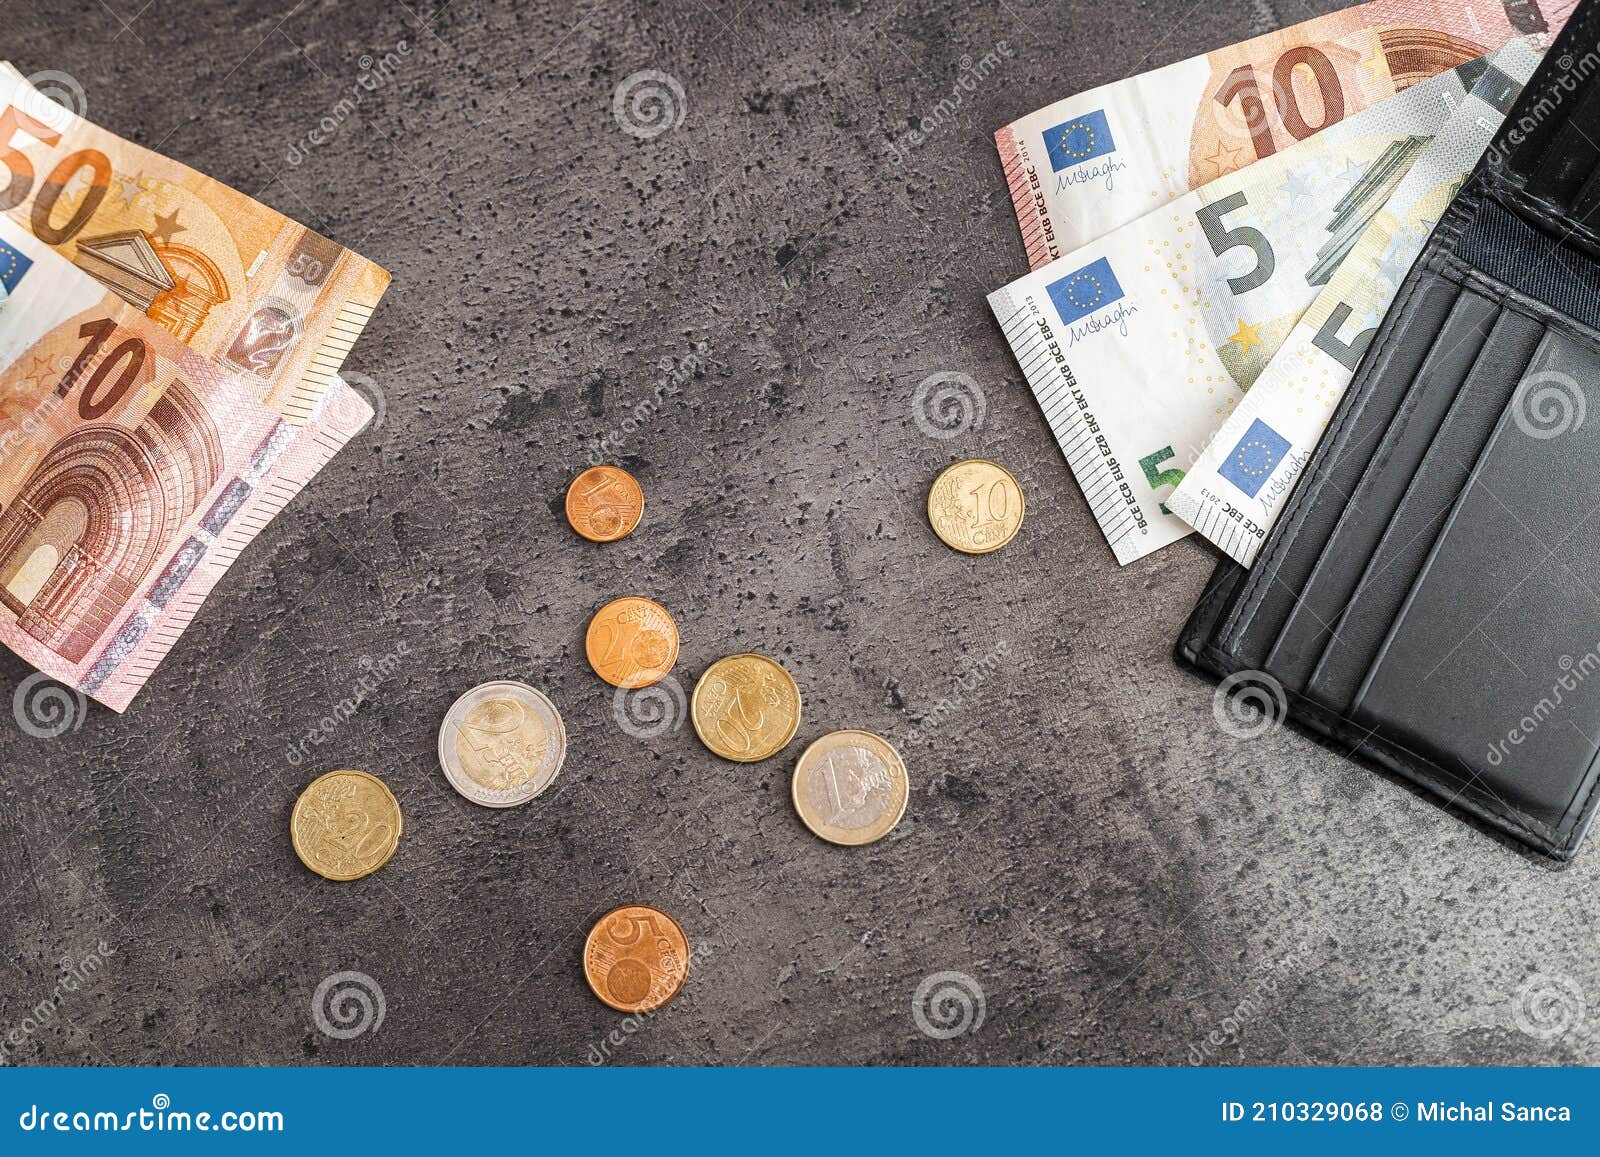 close up of money banknotes, coins and black wallet. euros on dark background